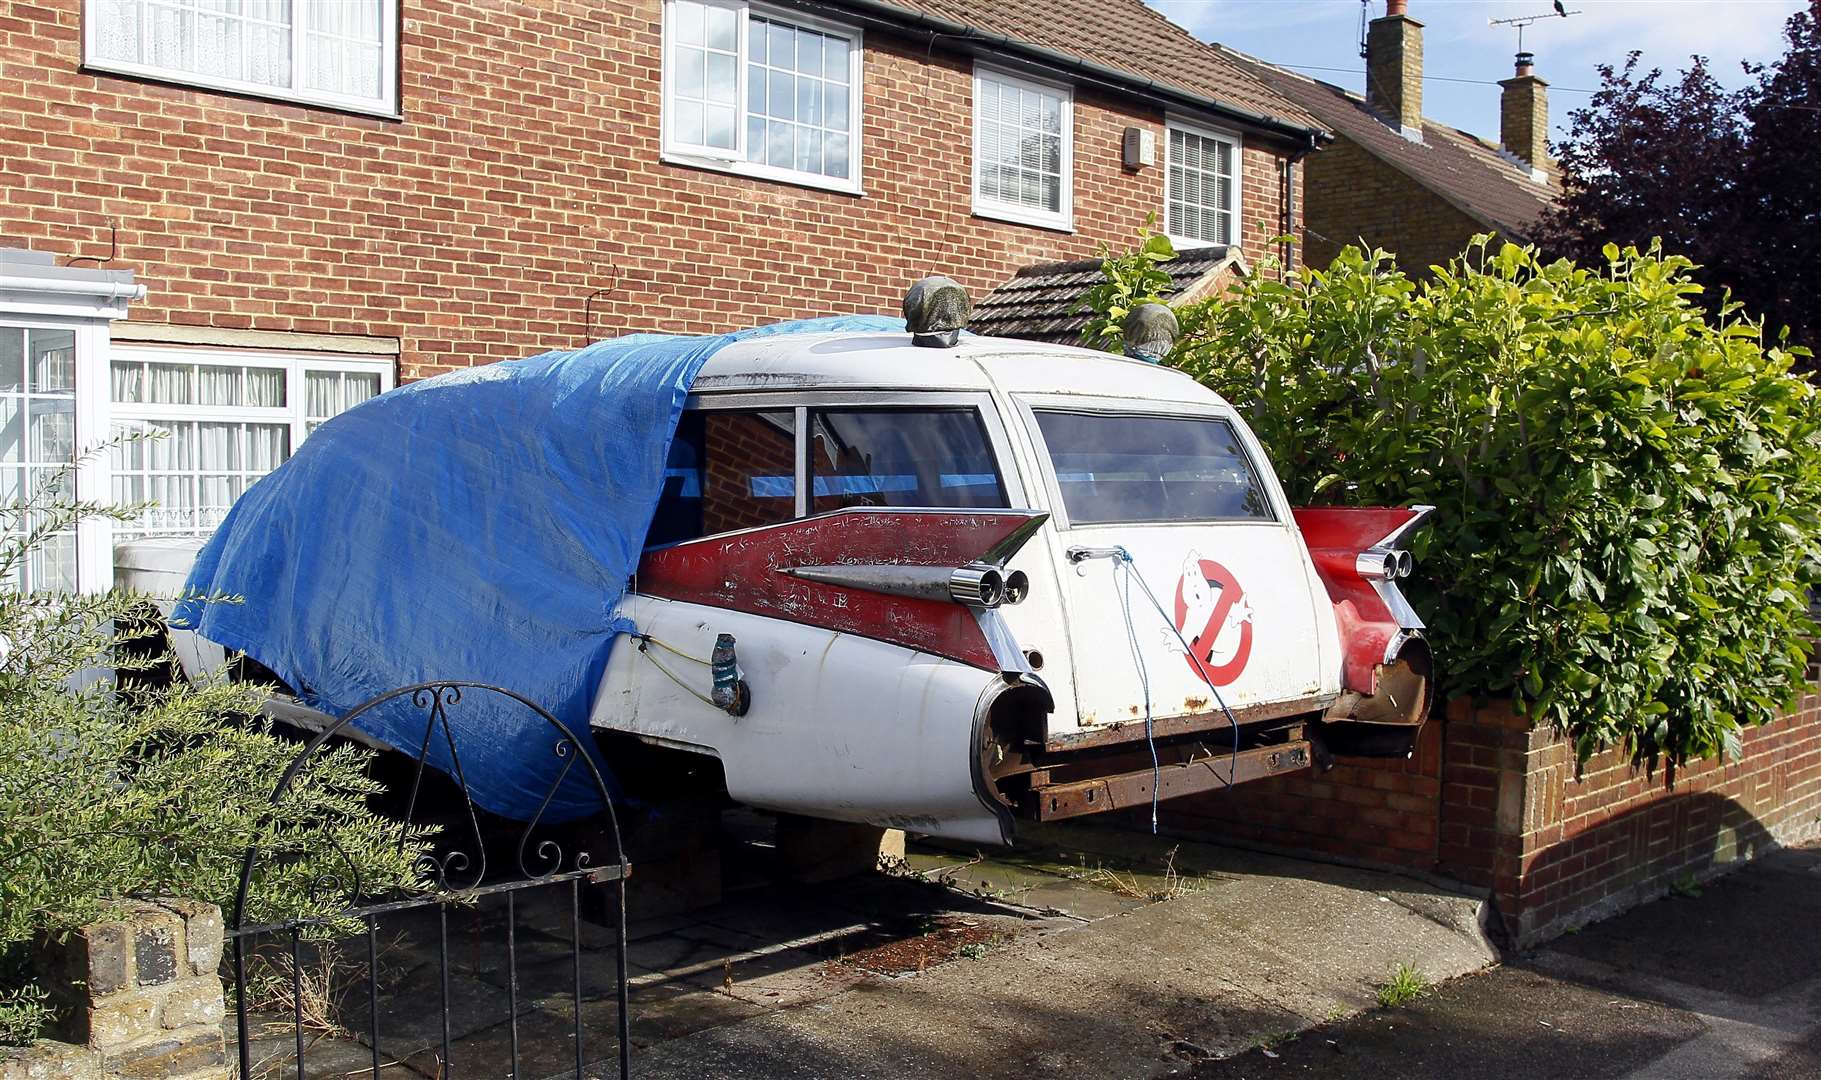 The replica Ghostbusters car has sat under tarpaulin in a Twydall driveway for a decade. Picture: Sean Aidan (15372454)